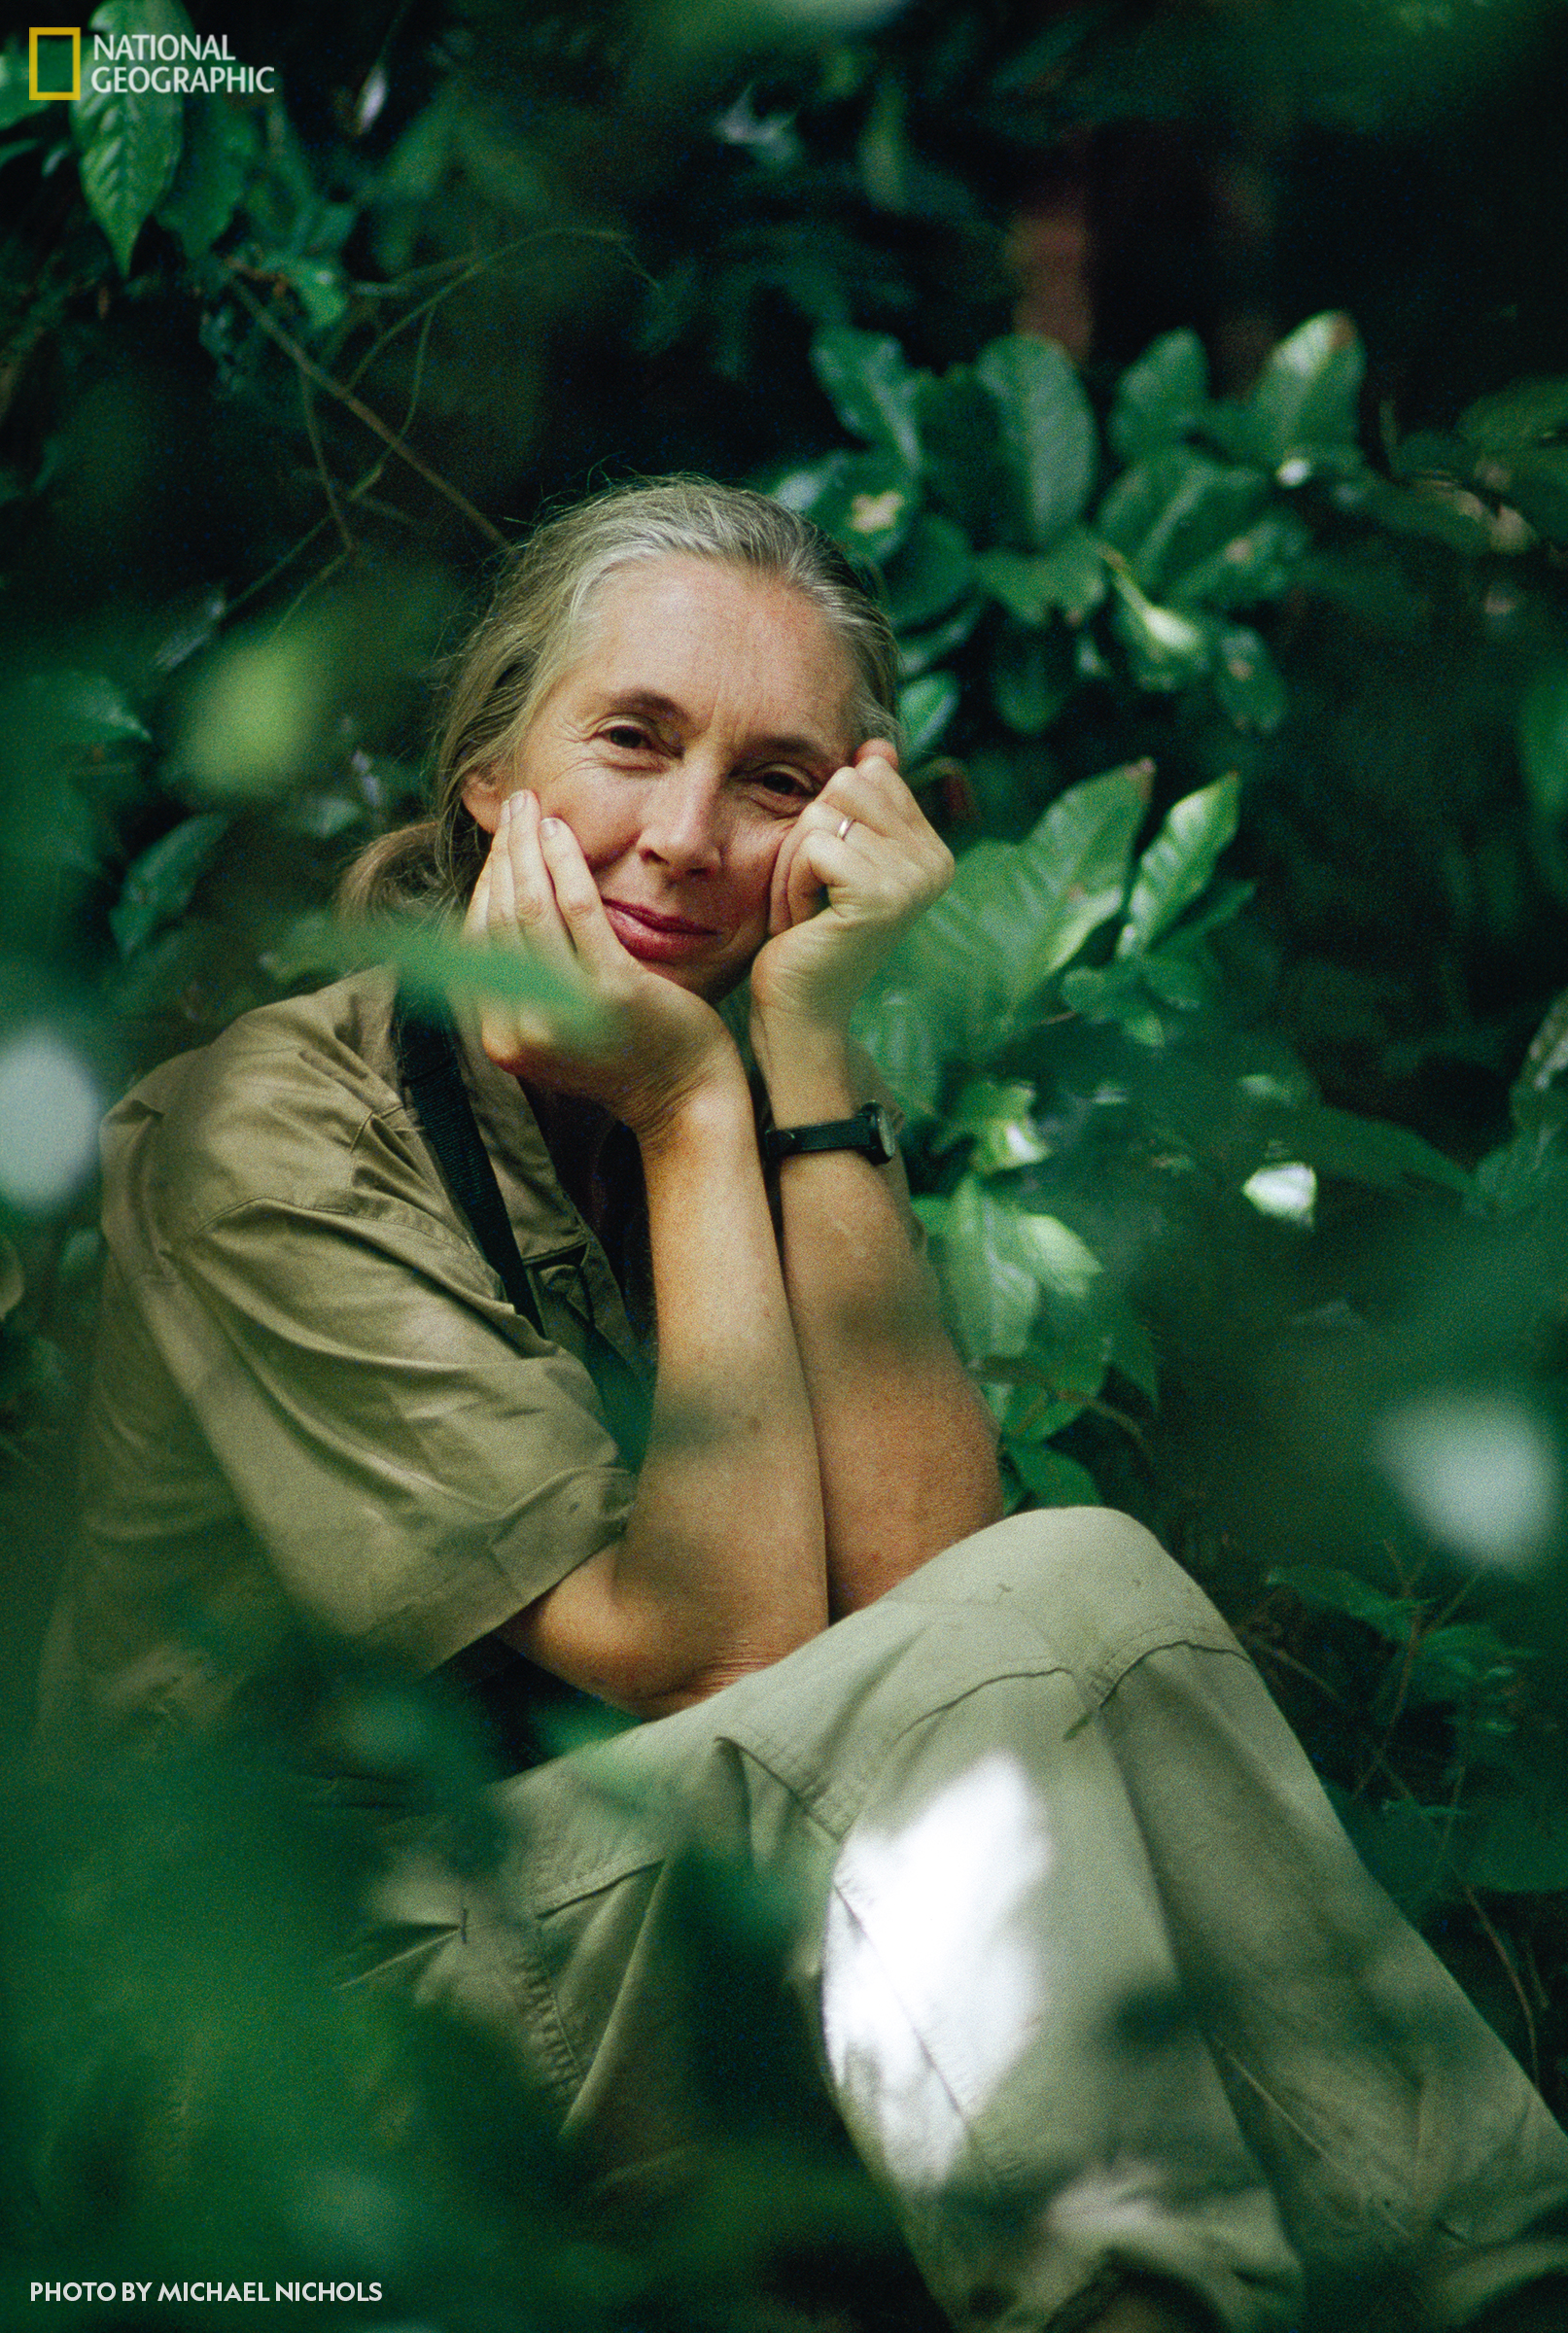 national geographic biography jane goodall